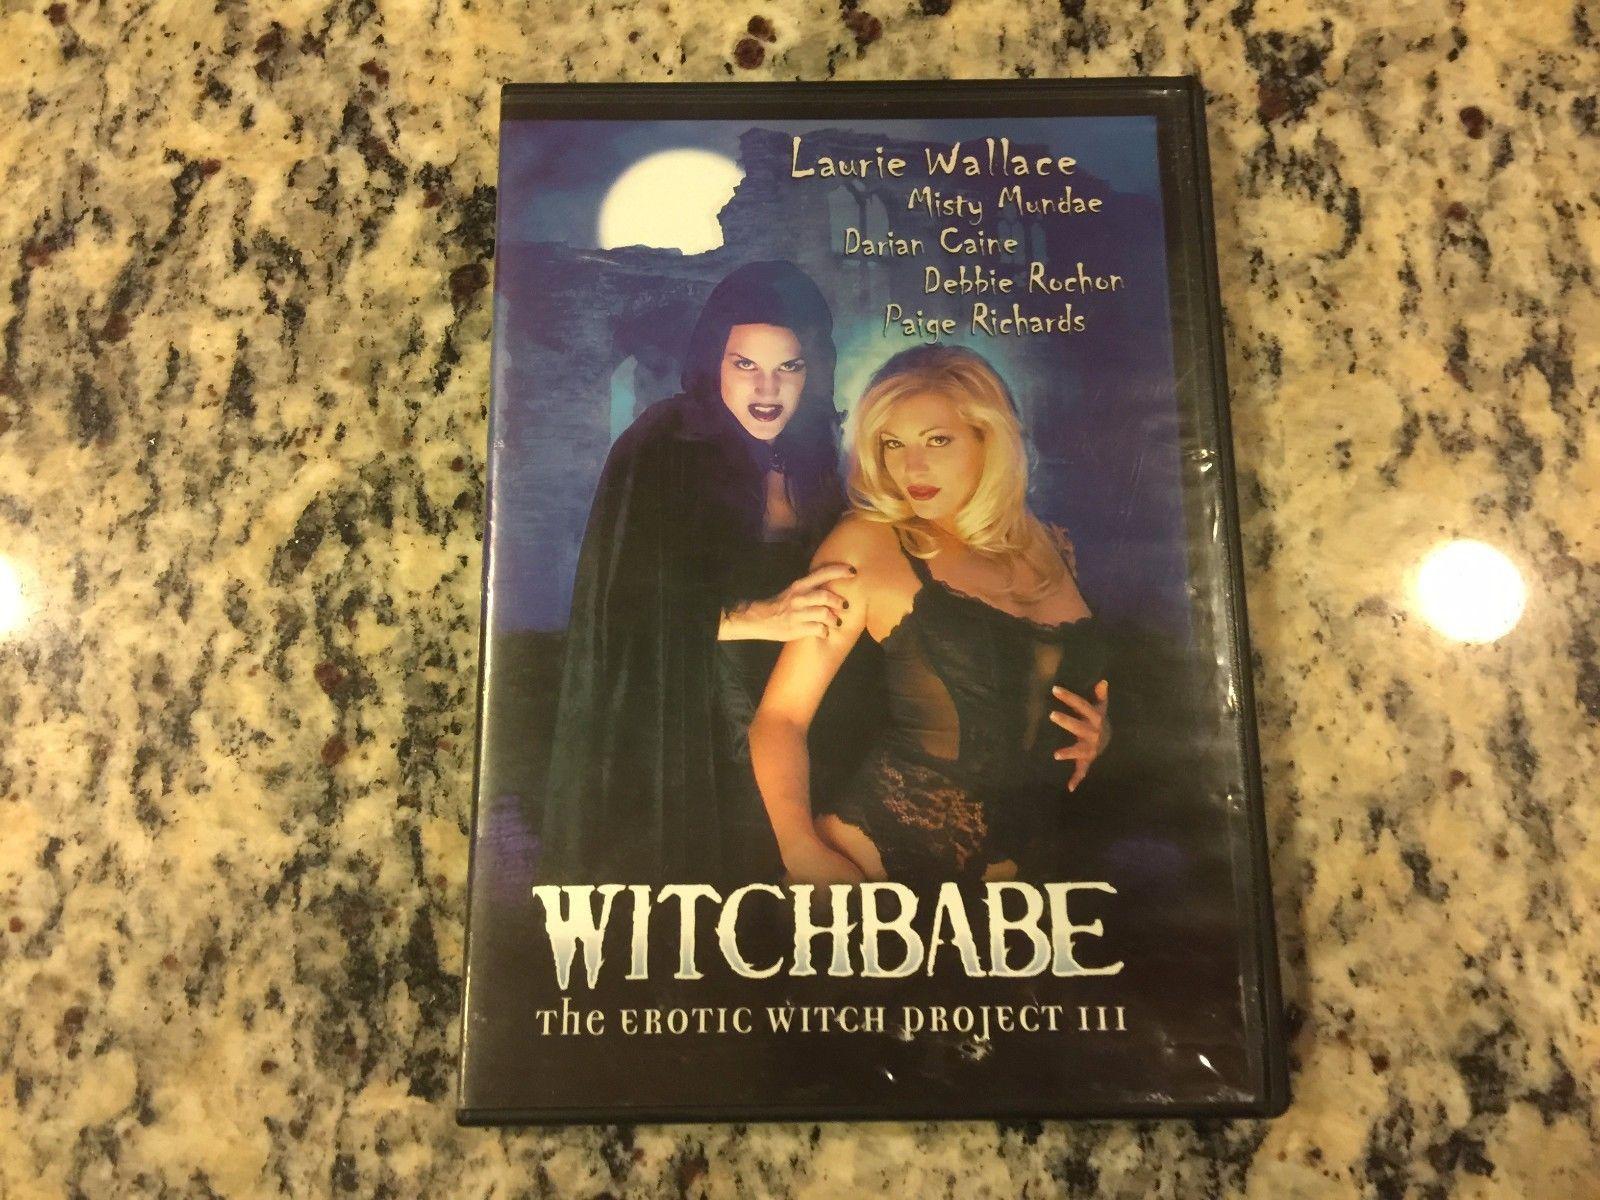 Erotic witch project dvd 